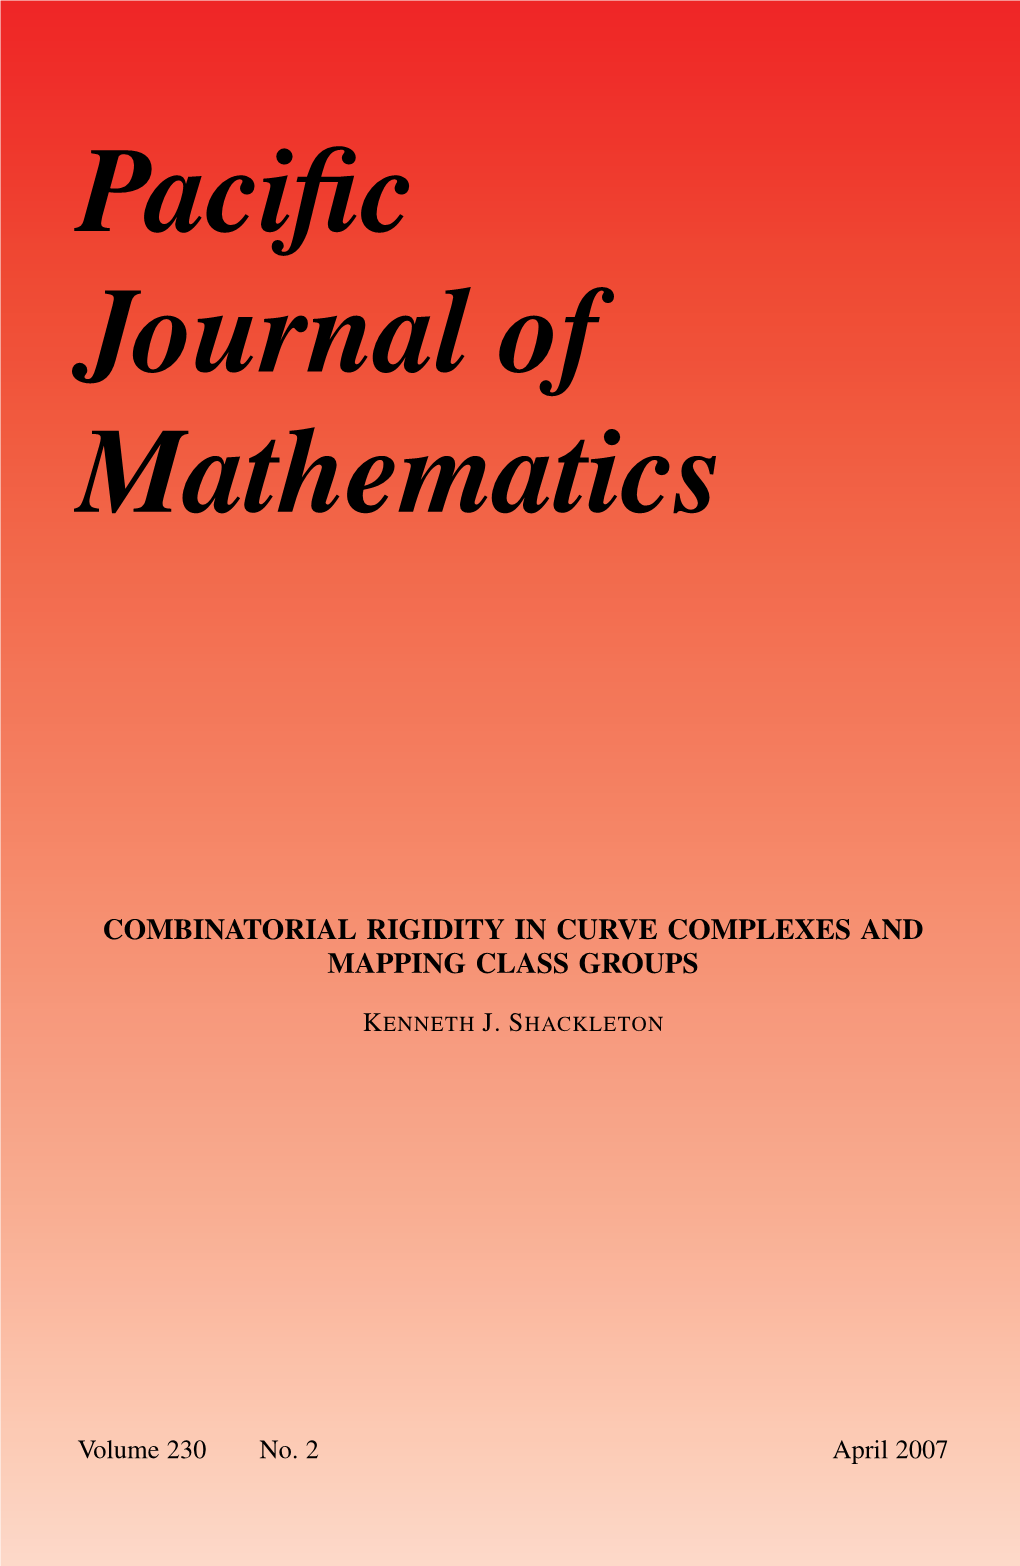 Combinatorial Rigidity in Curve Complexes and Mapping Class Groups